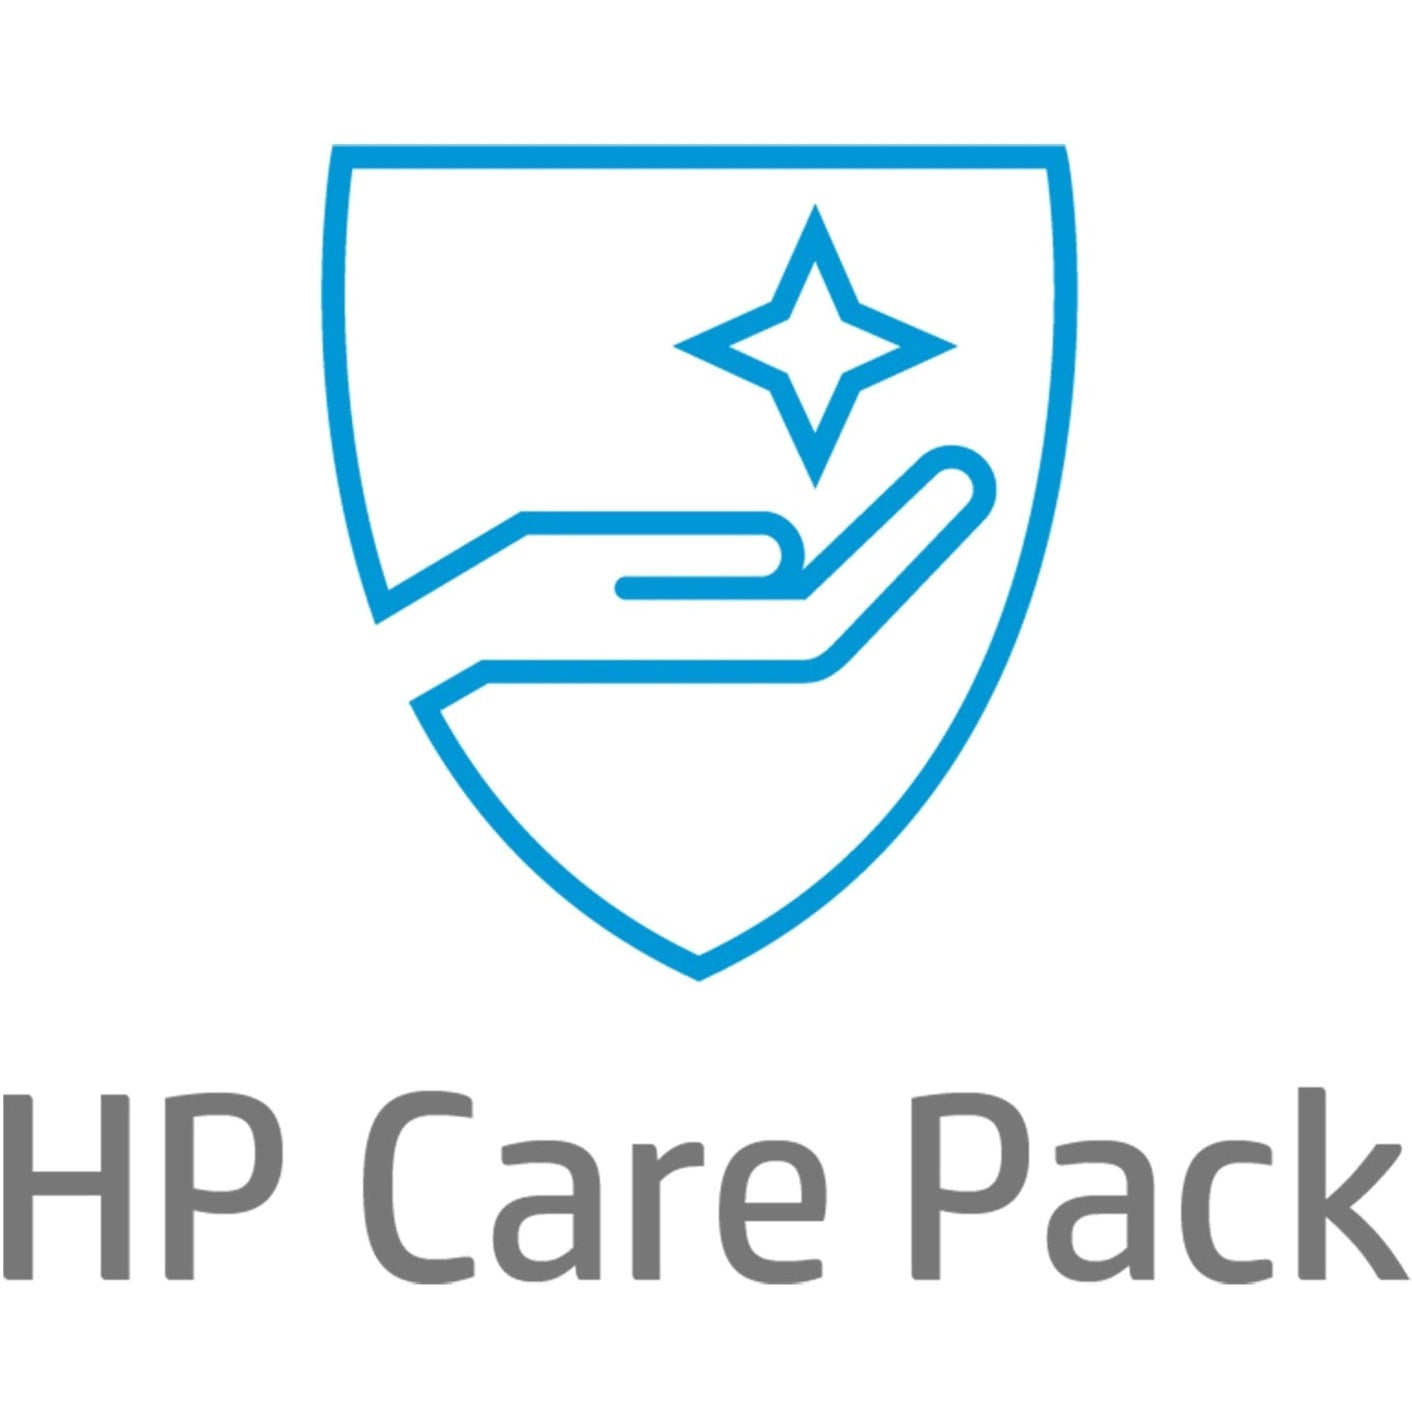 HP Care Pack - Extended Warranty - 5 Year - Warranty (UA6H1E)